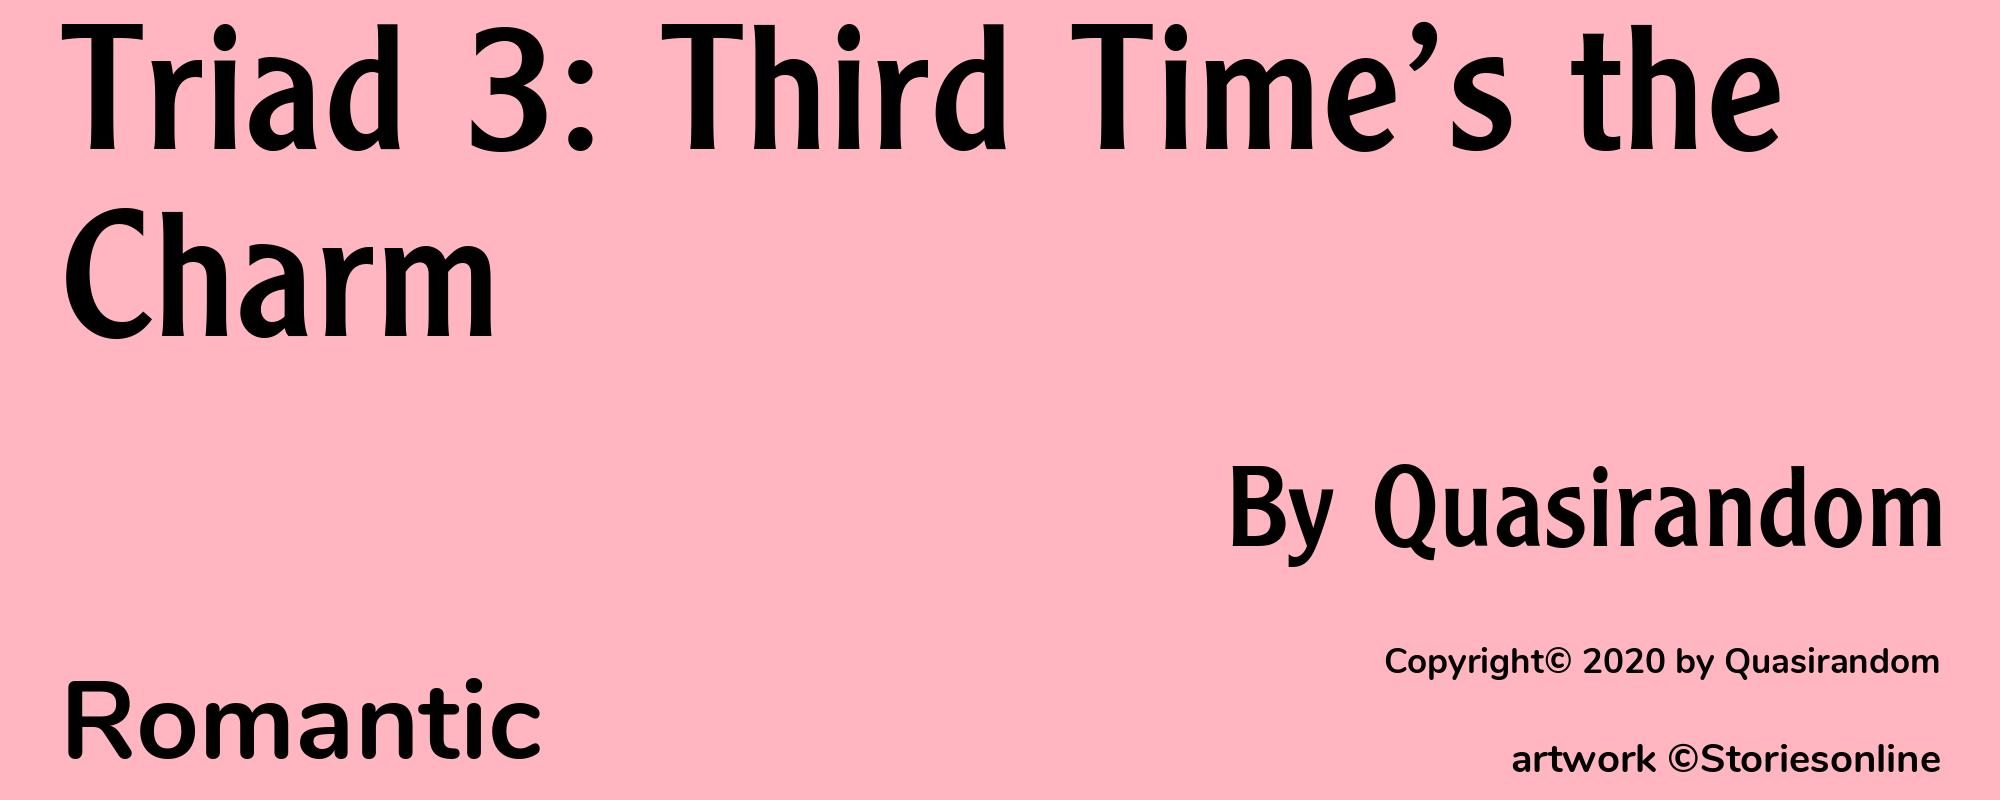 Triad 3: Third Time’s the Charm - Cover